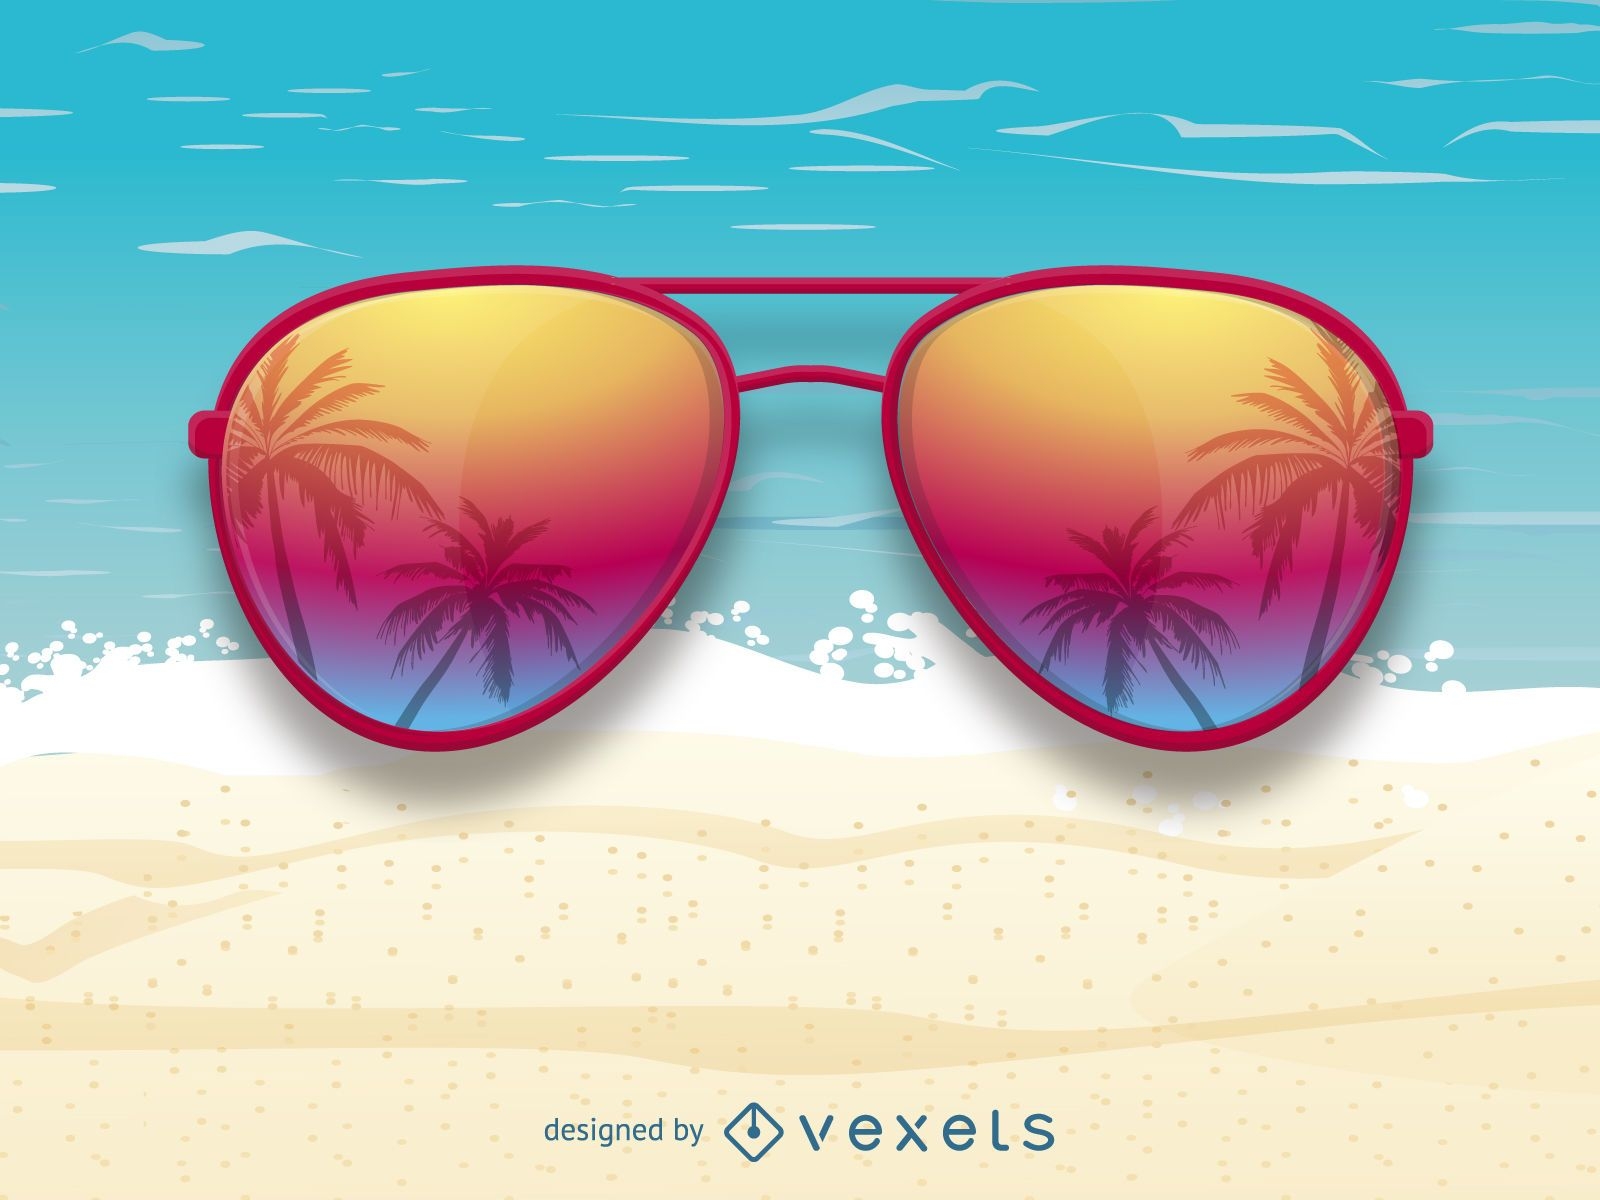 Sunglasses with palm trees reflection